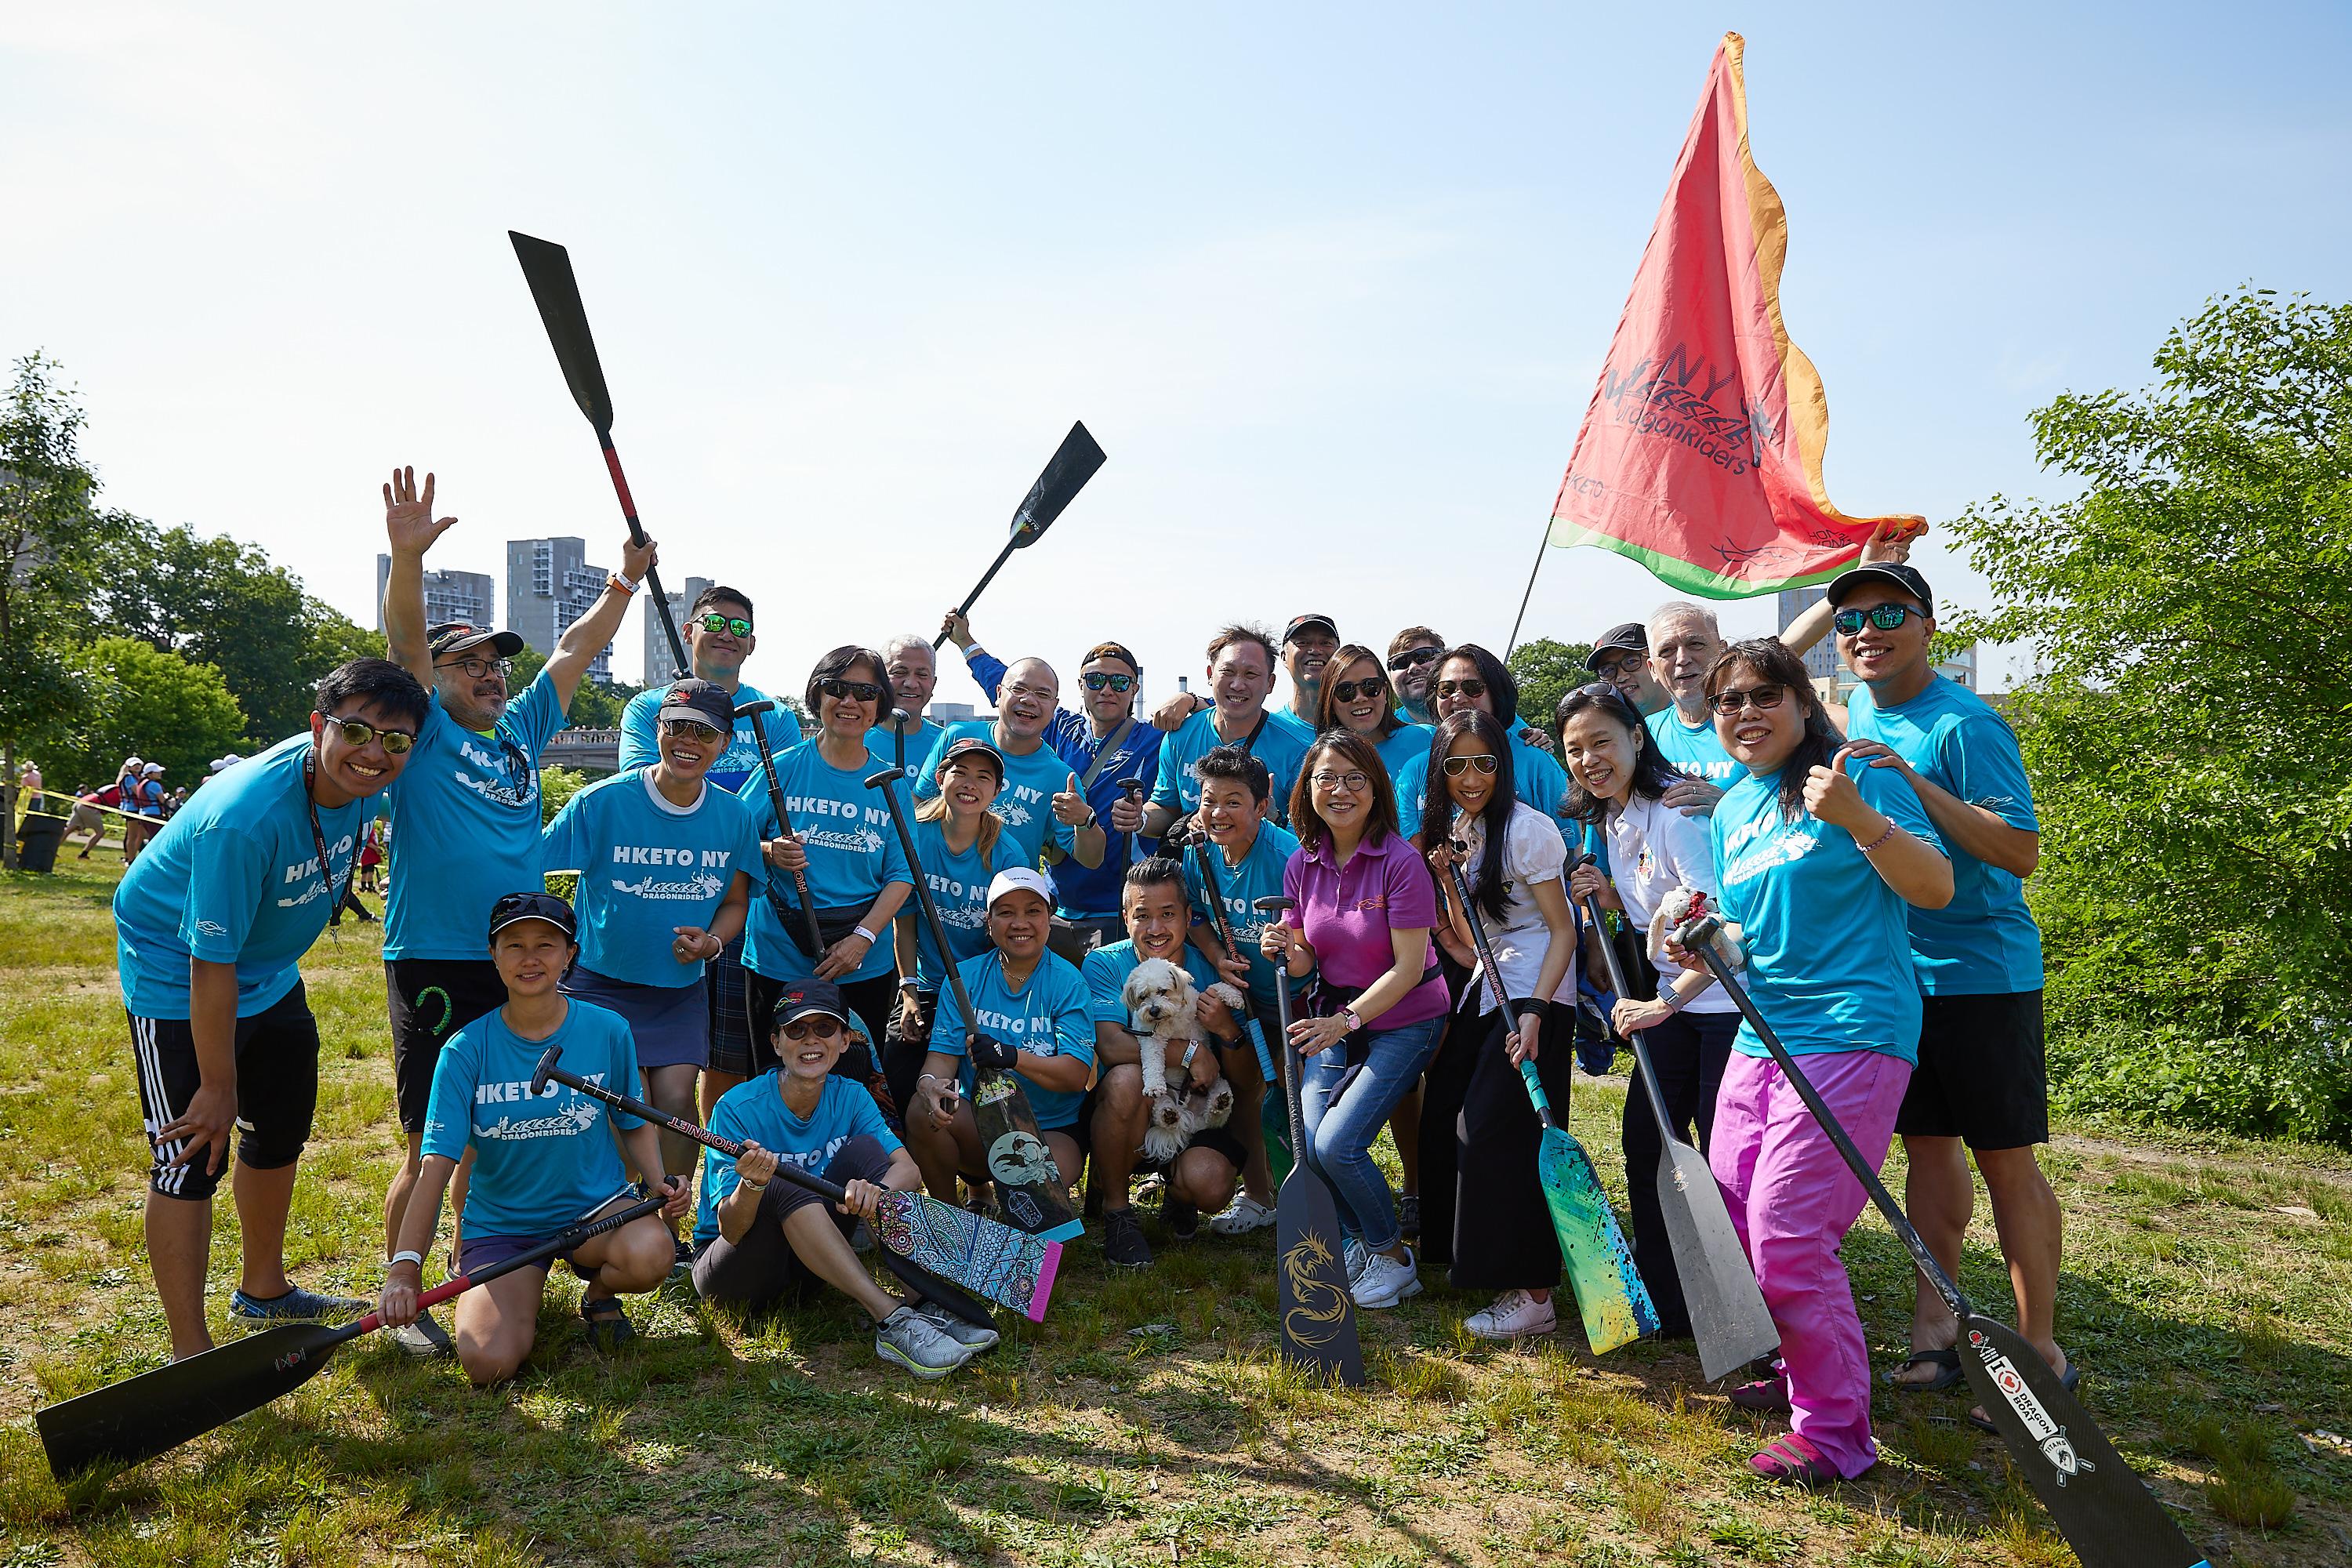 The Hong Kong Economic and Trade Office in New York Dragonriders take part in the 44th Boston Hong Kong Dragon Boat Festival today (June 11, Boston time).